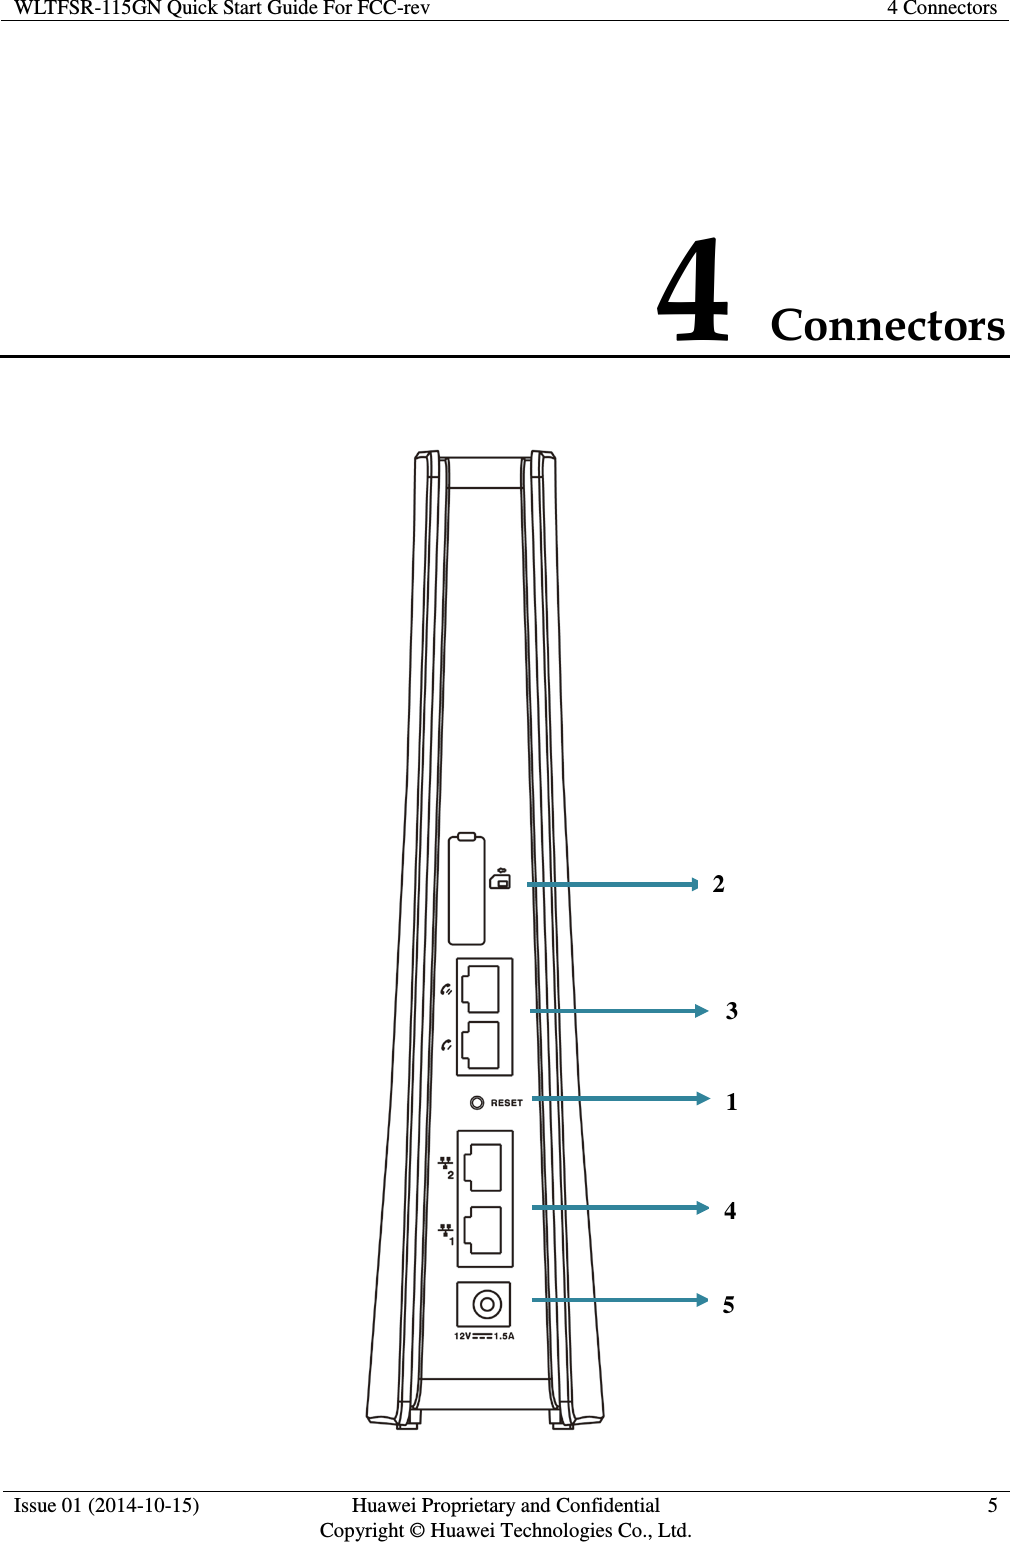 WLTFSR-115GN Quick Start Guide For FCC-rev 4 Connectors  4 Connectors       1 2 3 4 5 Issue 01 (2014-10-15)  Huawei Proprietary and Confidential                   Copyright © Huawei Technologies Co., Ltd. 5  